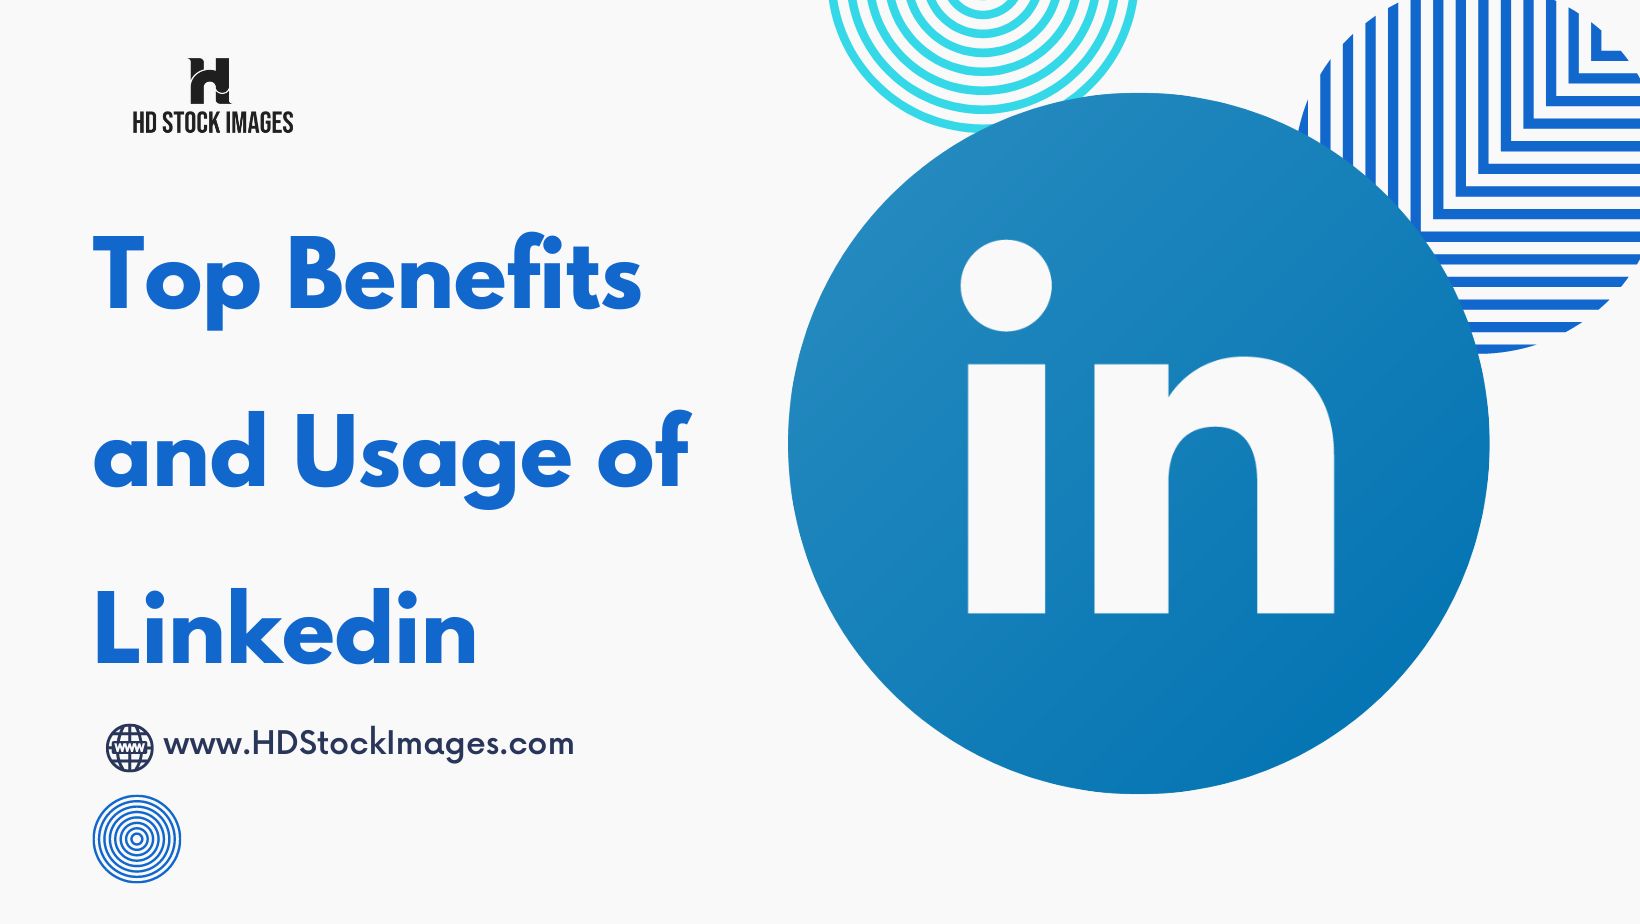 An image of Top Benefits and Usage of Linkedin